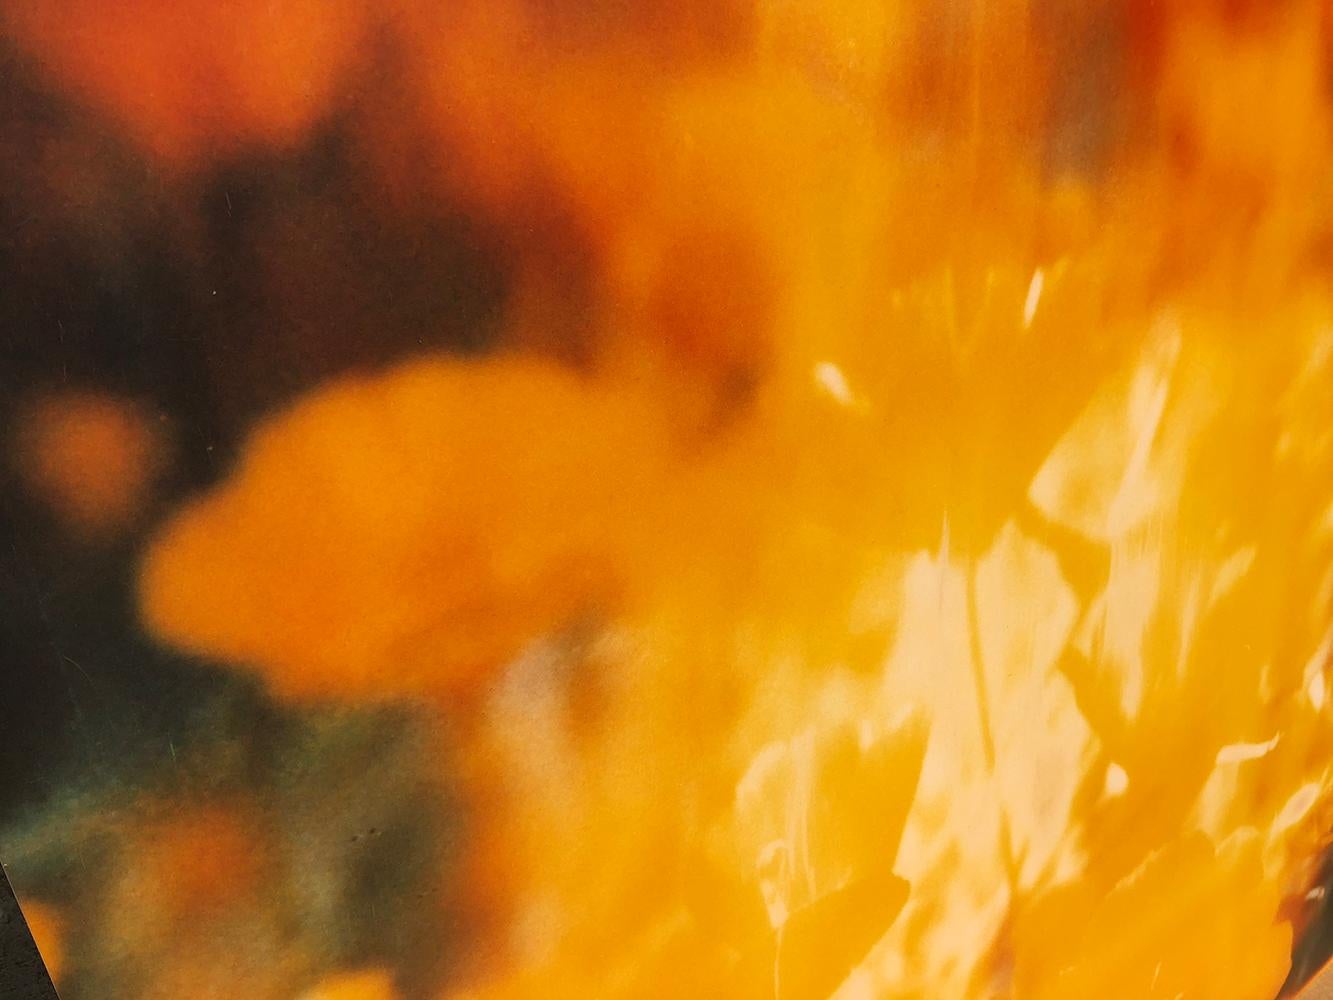 Yellow Flower (The Last Picture Show) 128x125cm, 2005, Edition 4/5, analog C-Print, hand-printed by the artist on Fuji Crystal Archive Paper, based on a Polaroid, sigened on verso, Artist Inventory 672.04, mounted on Aluminum with matte